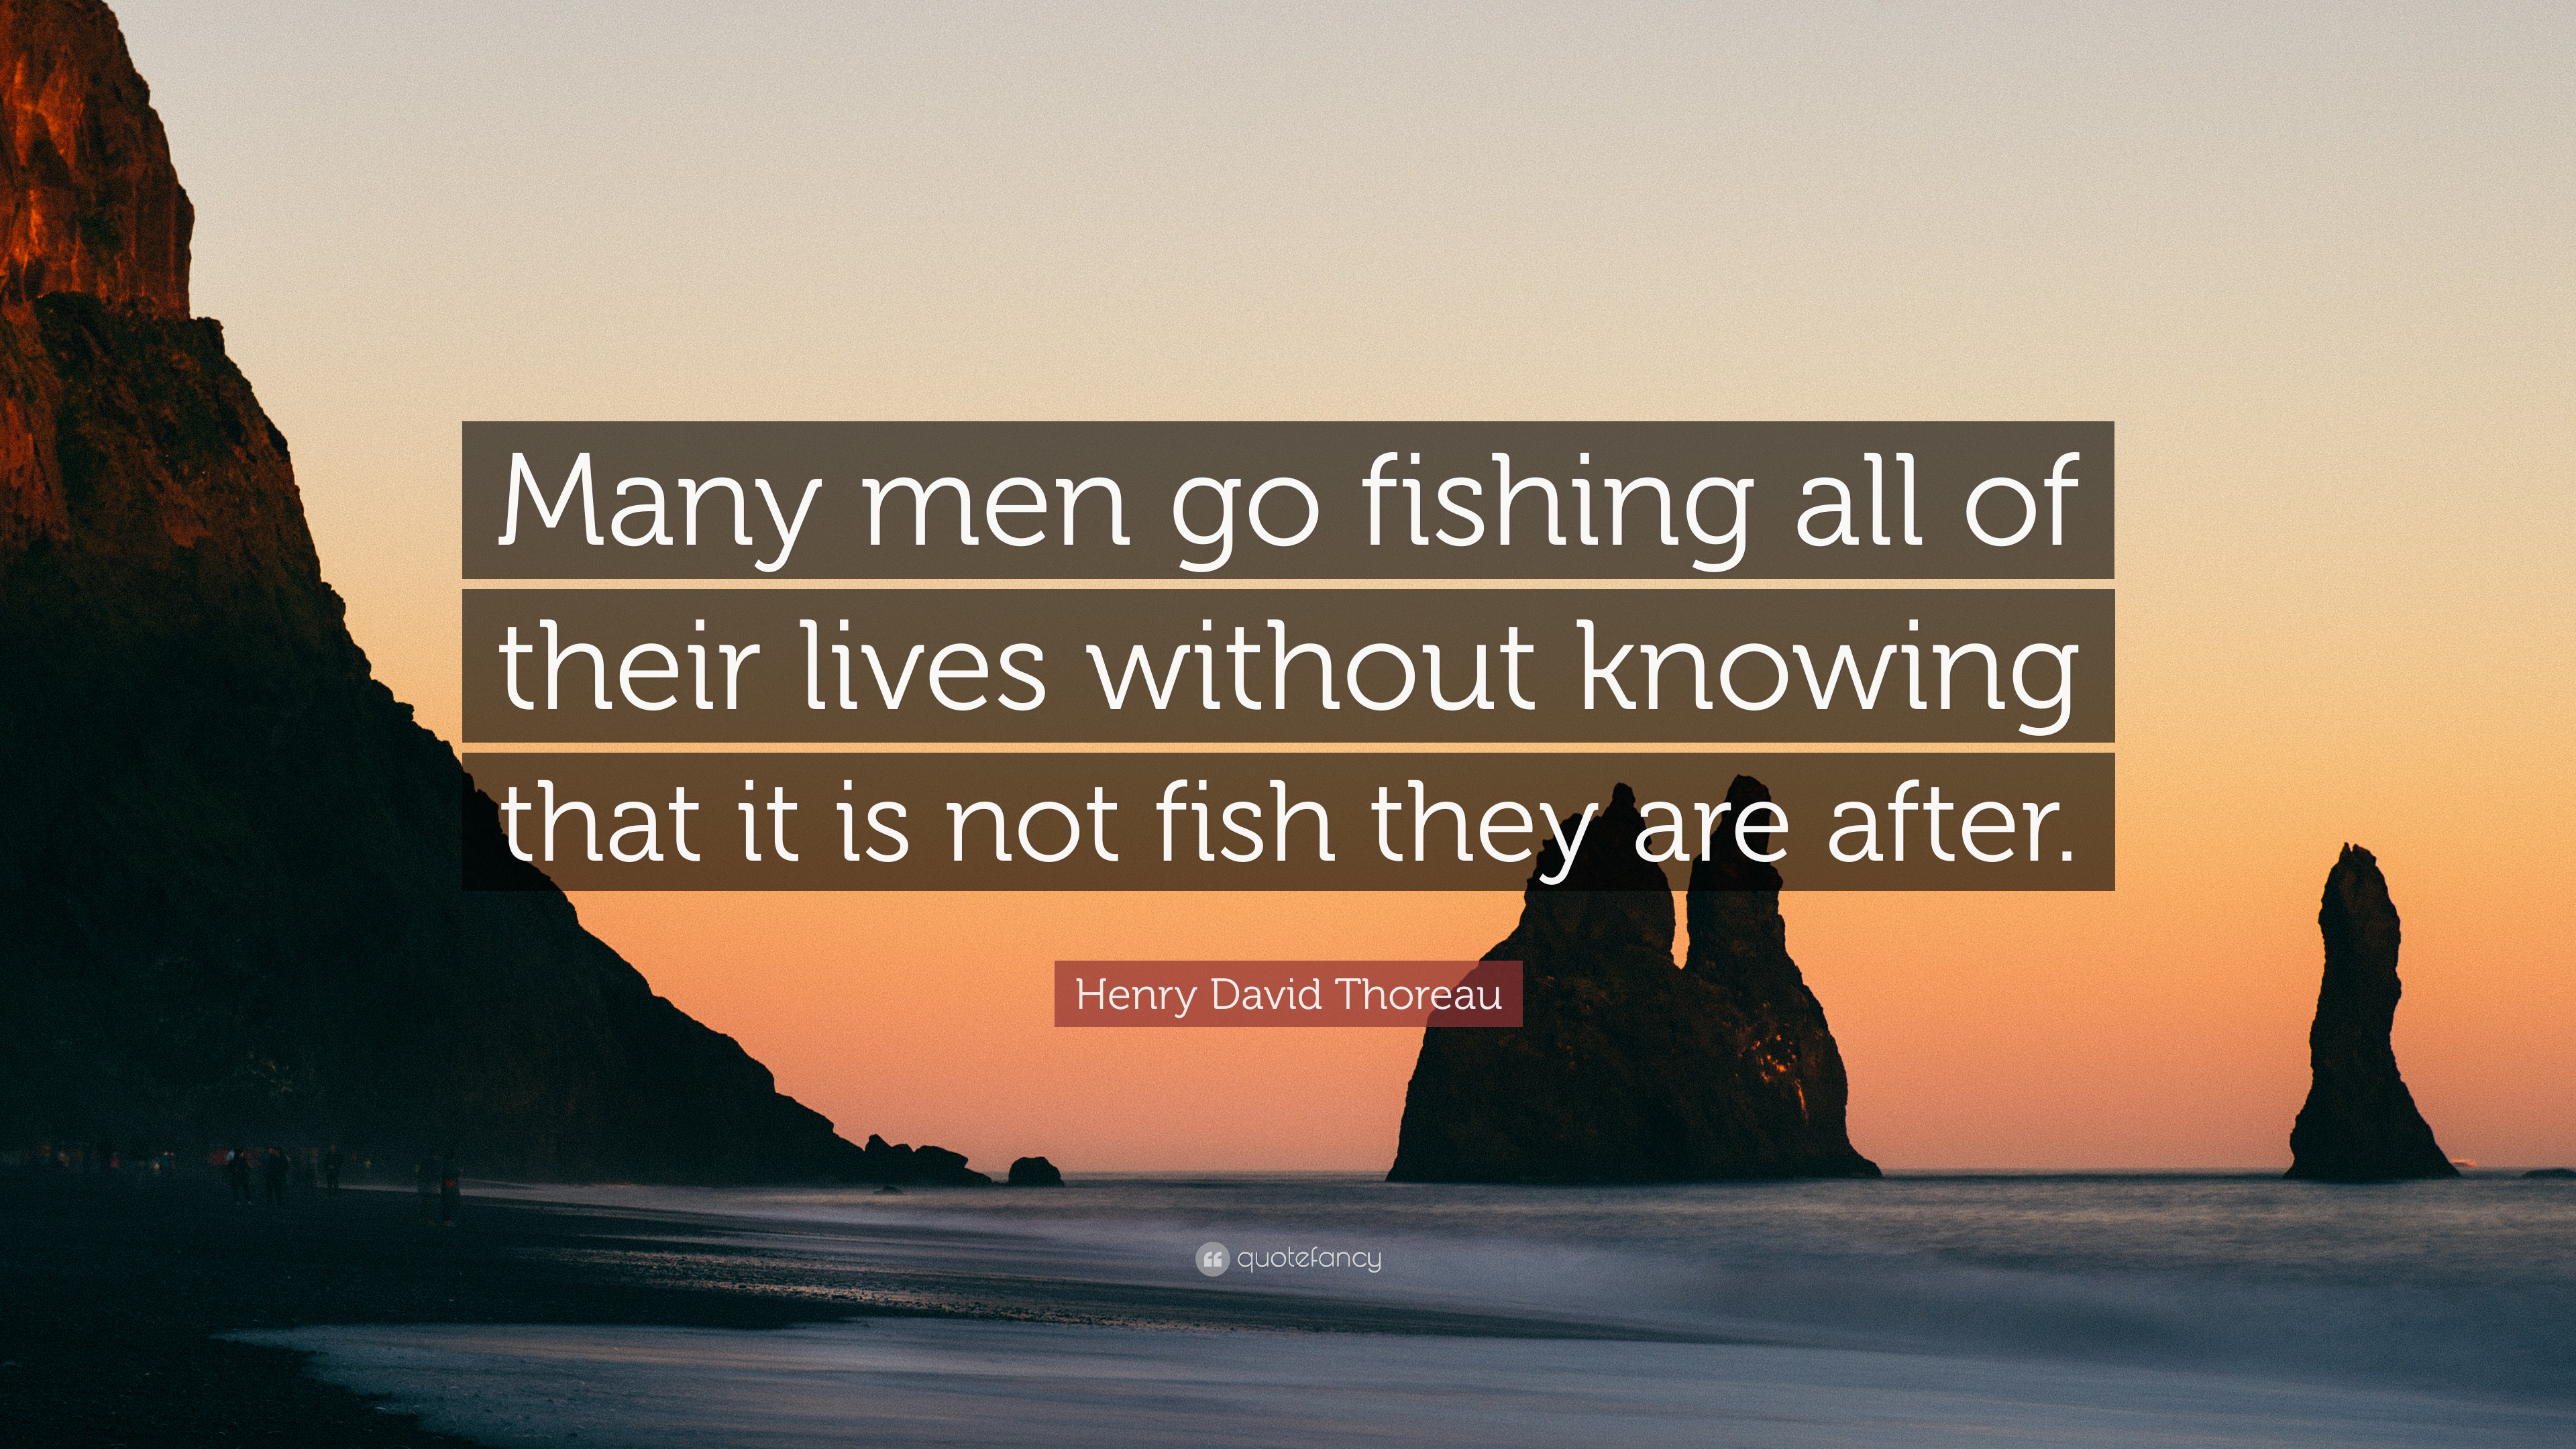 Henry David Thoreau Quote: “Many men go fishing all of their lives without  knowing that it